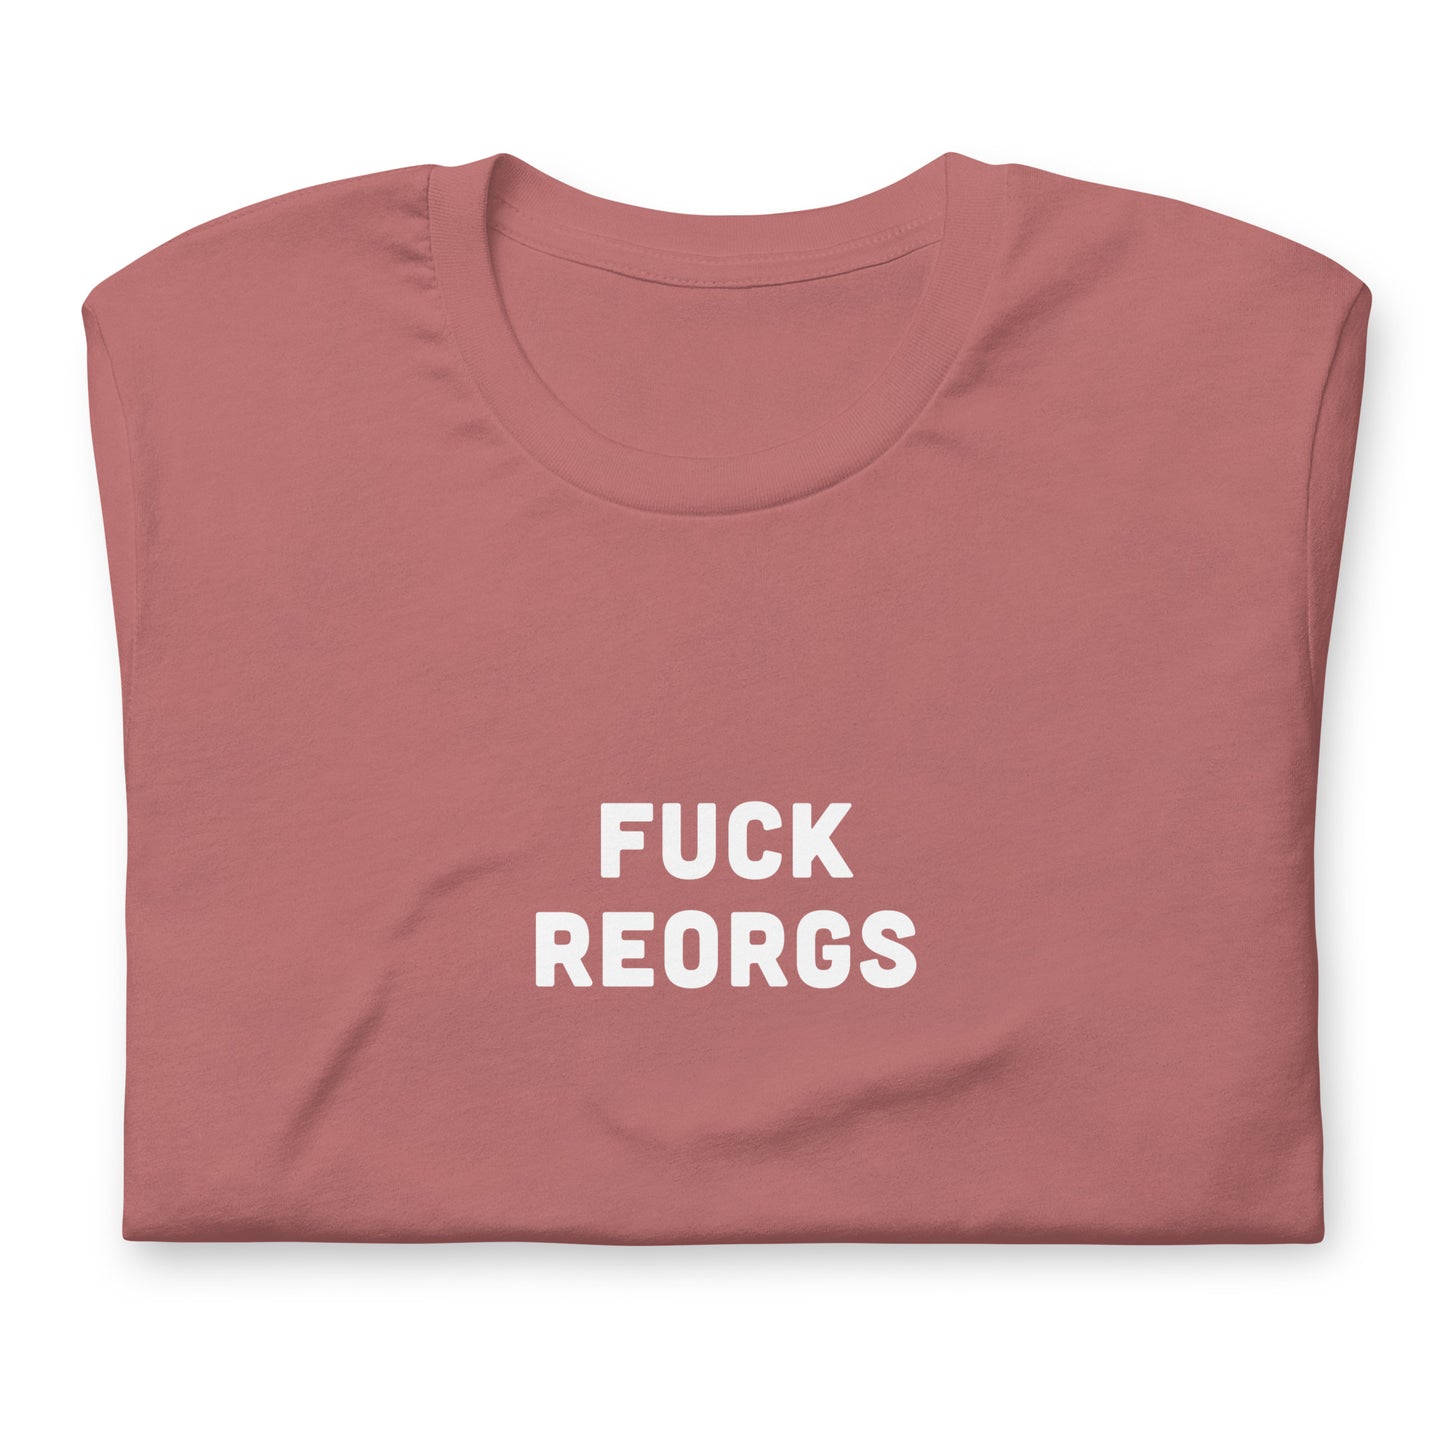 Fuck Reorgs T-Shirt Size 2XL Color Navy